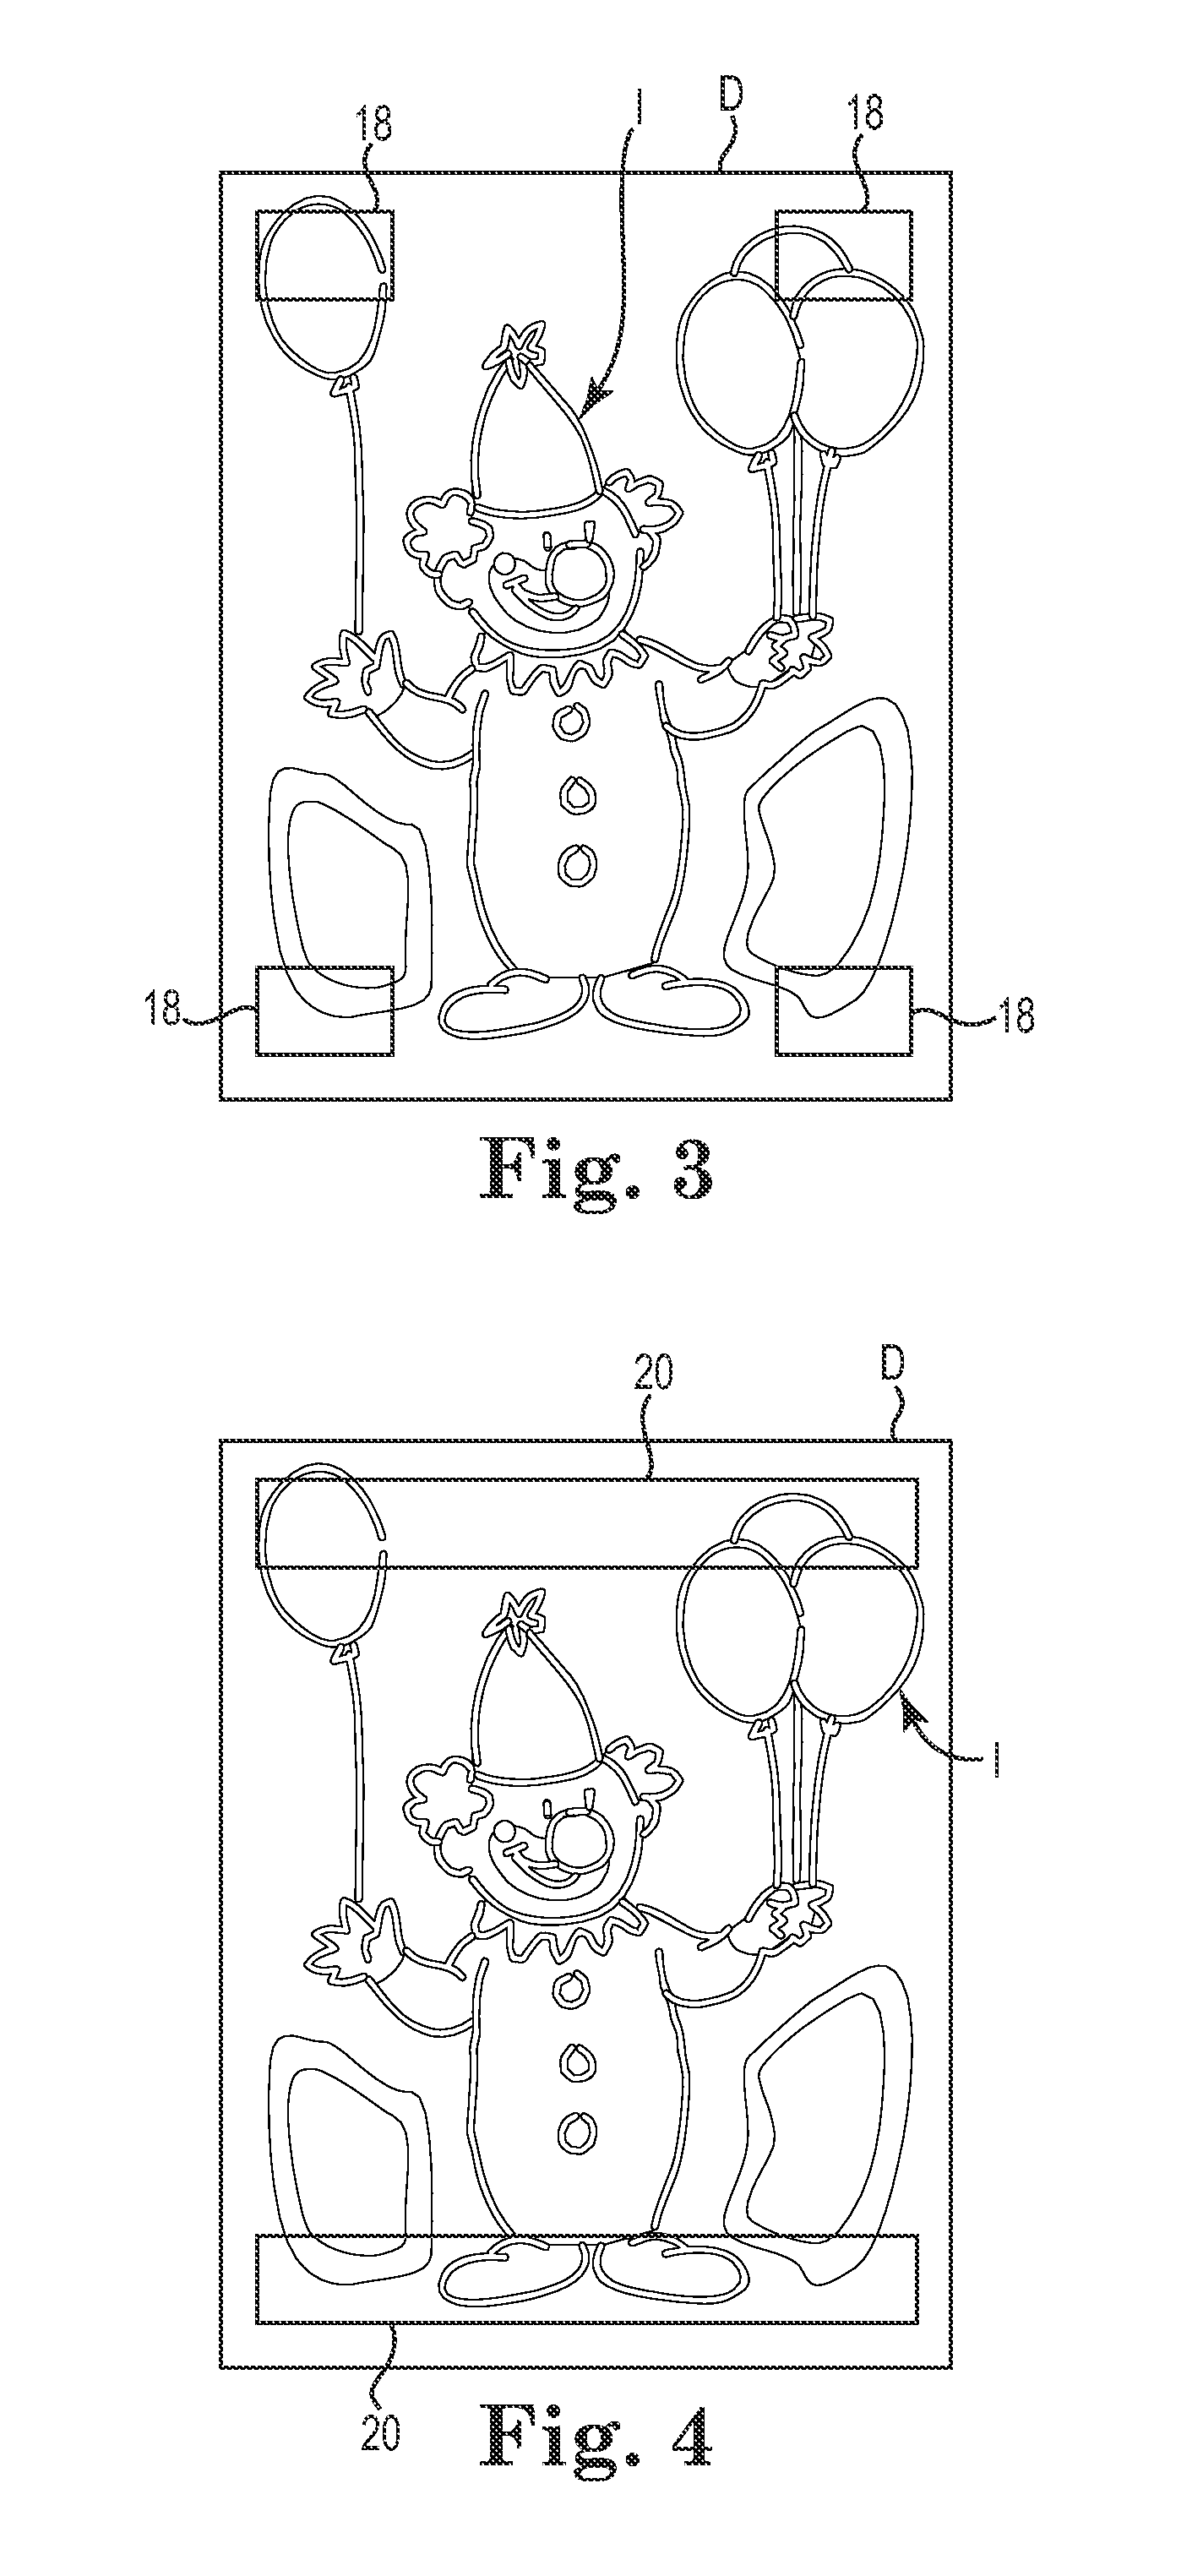 Static Cling Display Material and Methods